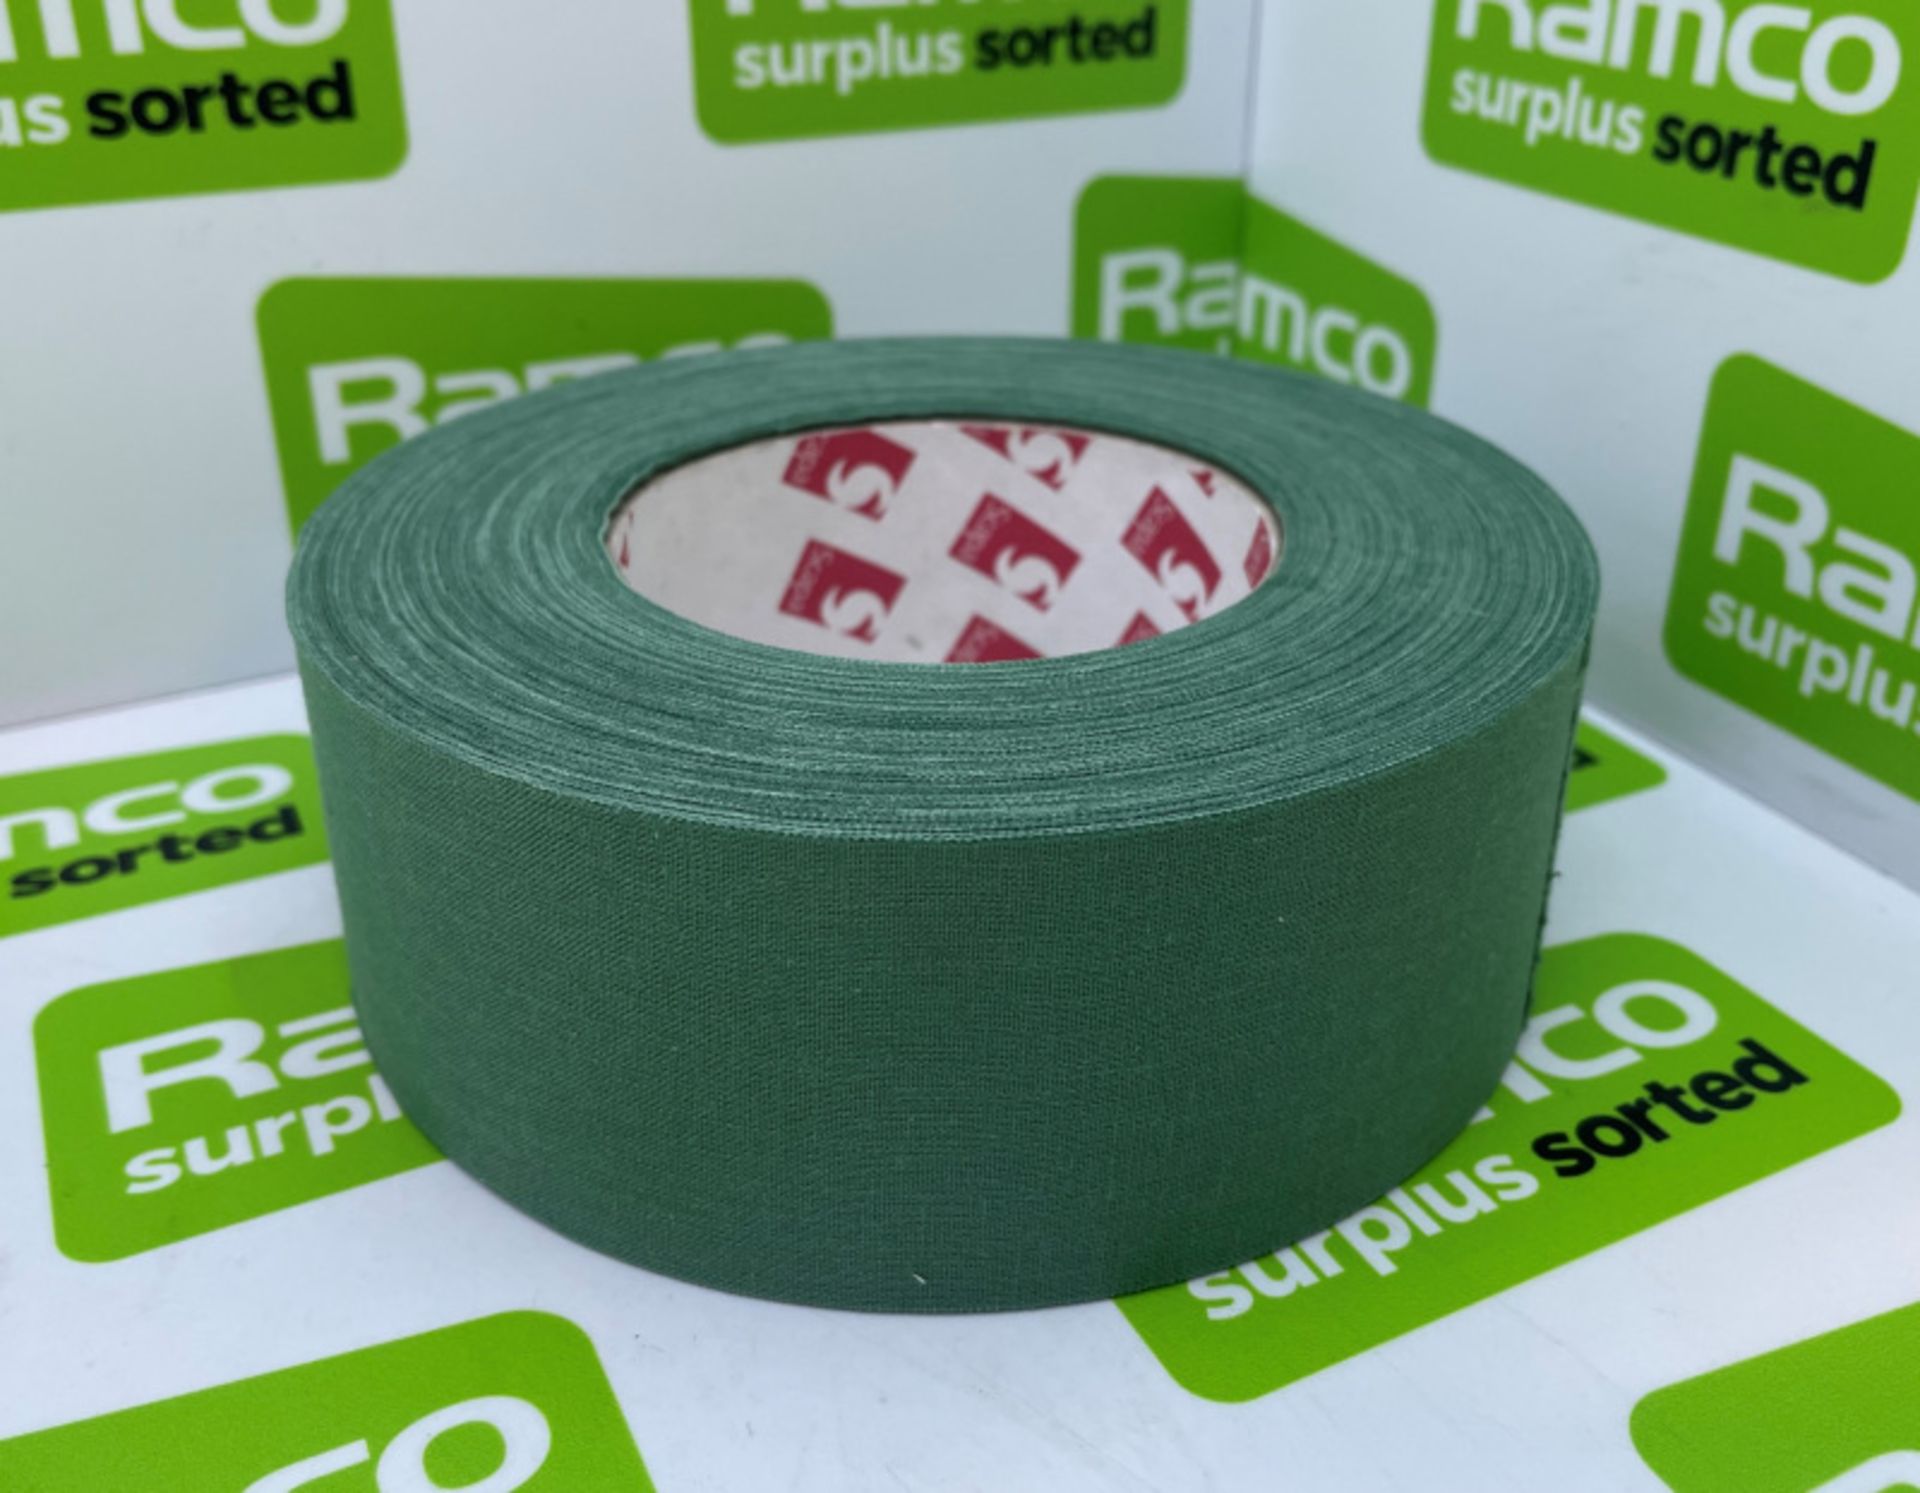 Scapa 3302 Pro Tape - Olive Green - 50mm x 50M rolls - 16 rolls per box - 31 boxes - Image 2 of 5